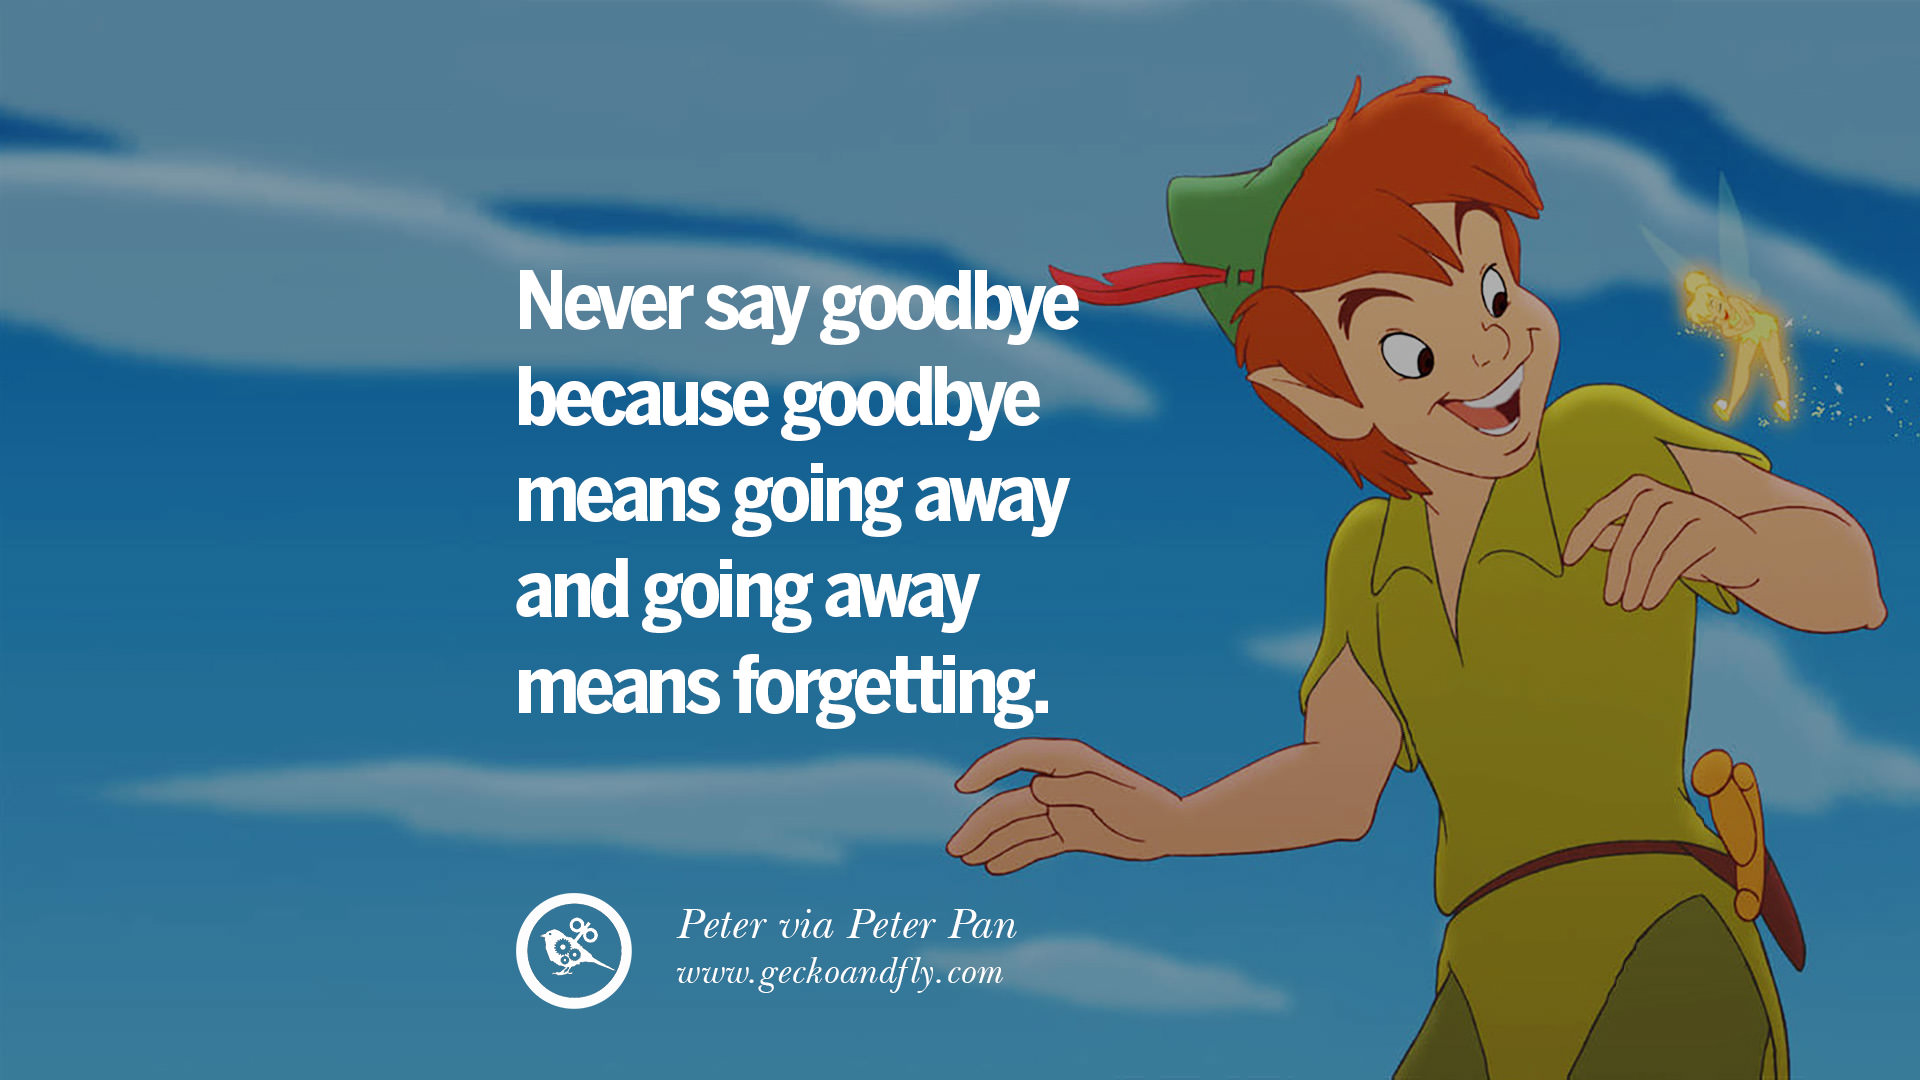 35 Inspiring Quotes From Disney S Animations Video Wallpaper Images, Photos, Reviews